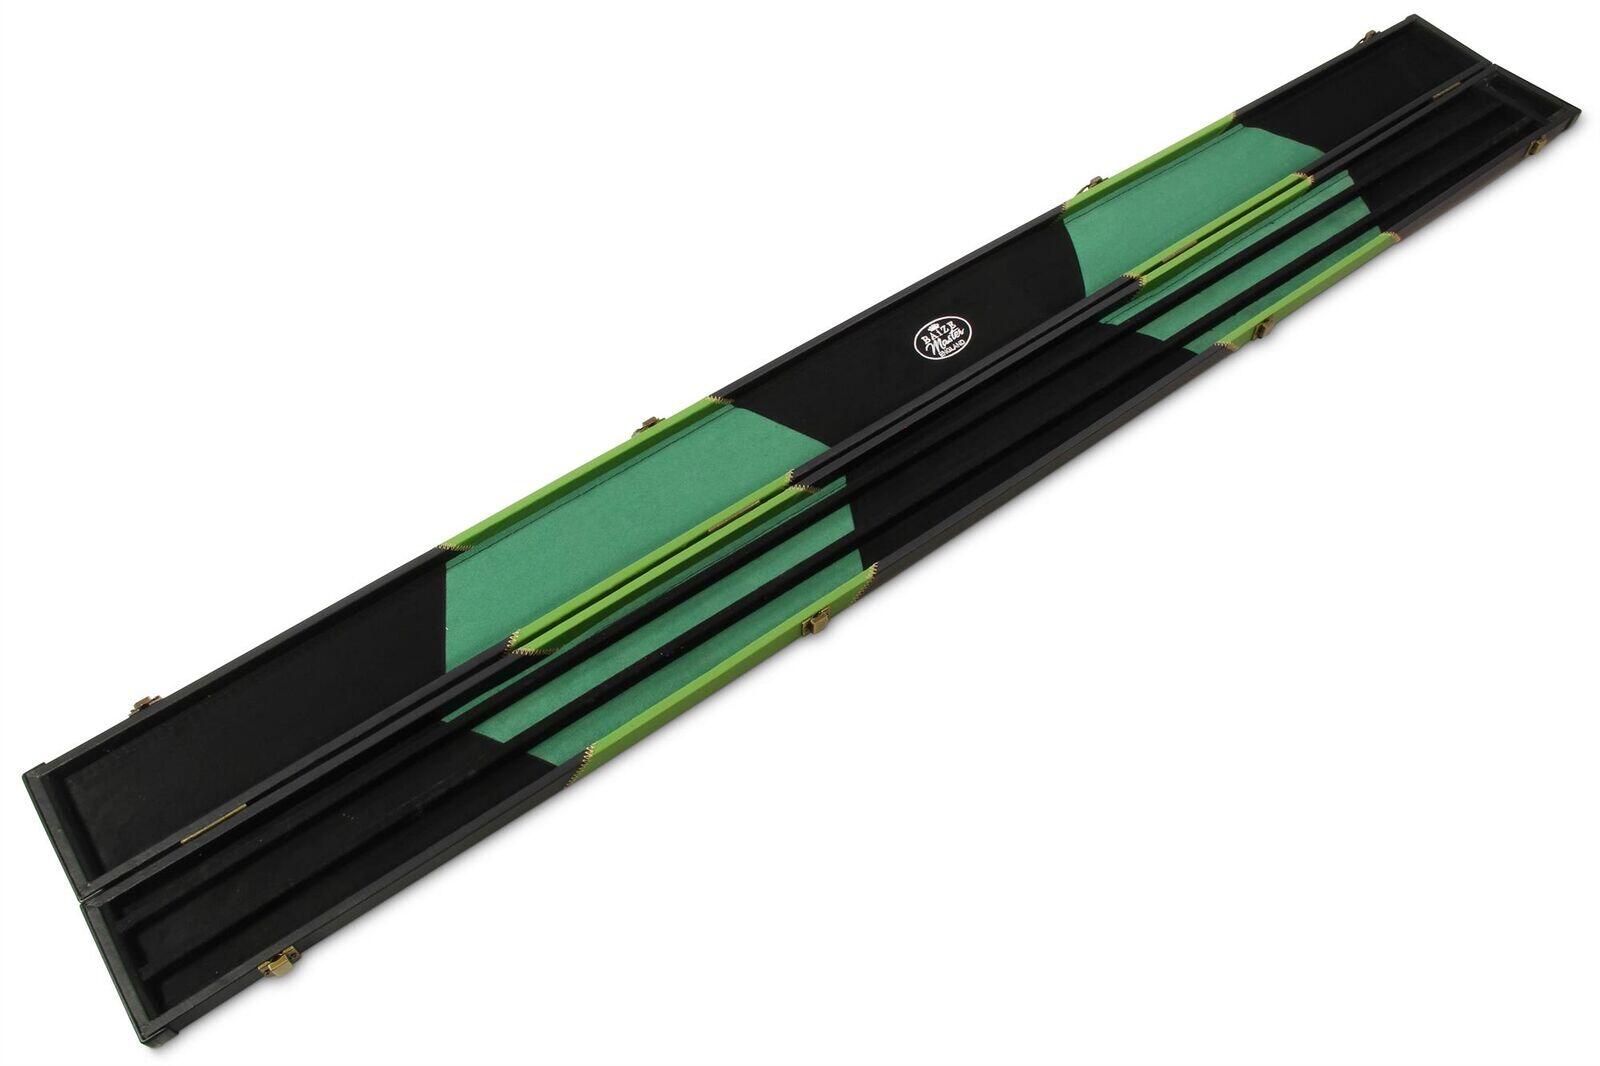 Baize Master 1 Piece WIDE GREEN ARROW Snooker Pool Cue Case - Holds 3 Cues 3/7